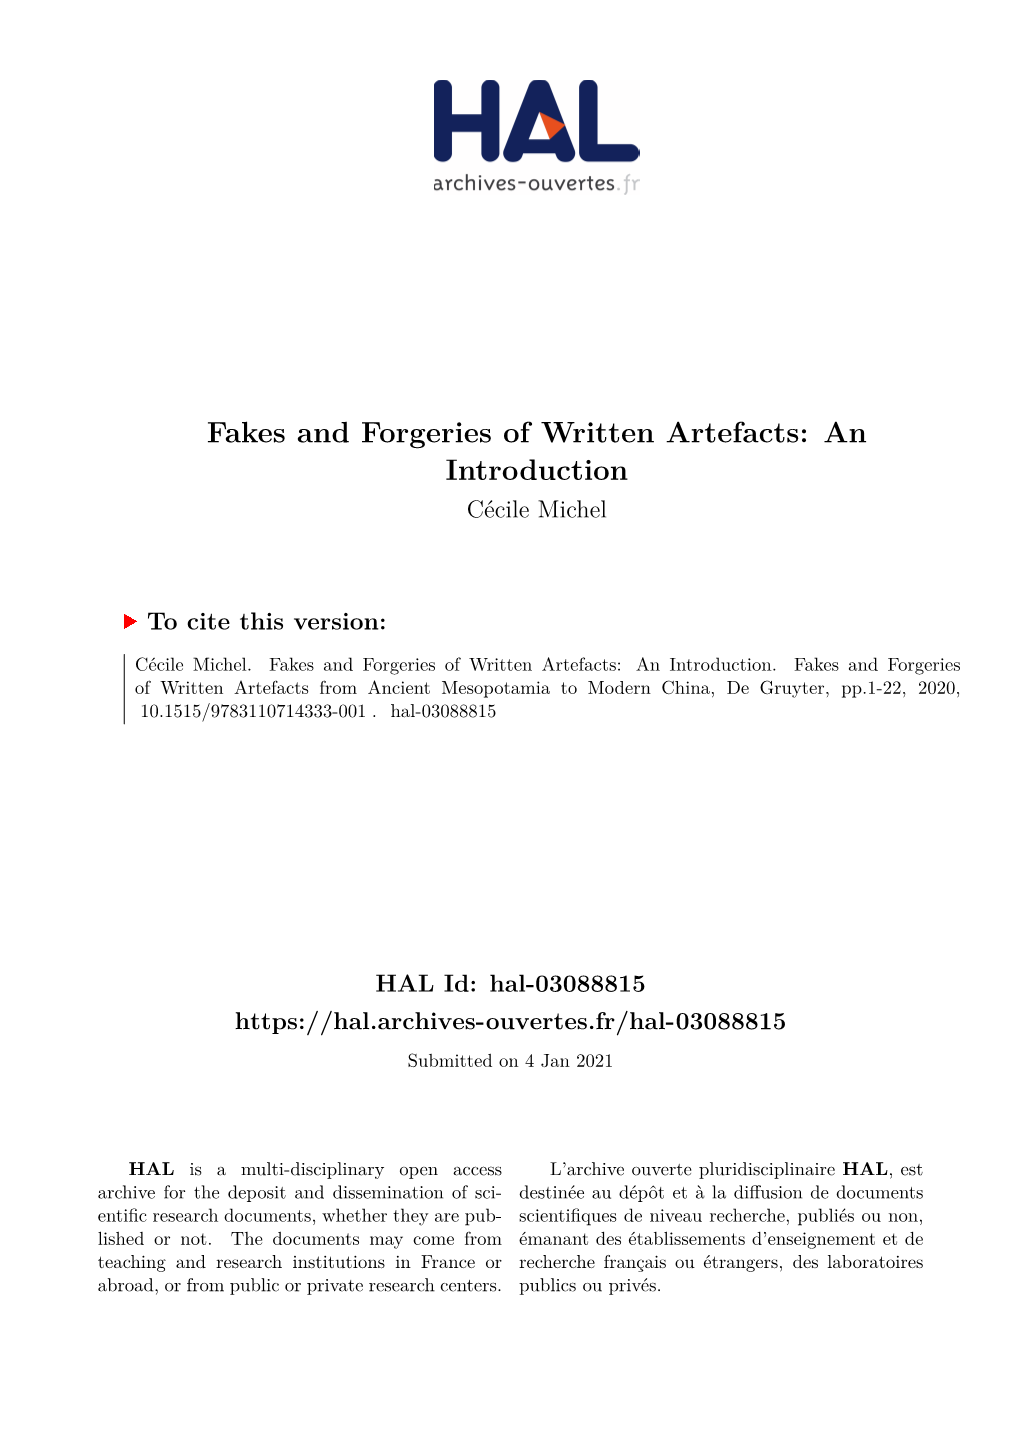 Fakes and Forgeries of Written Artefacts: an Introduction Cécile Michel